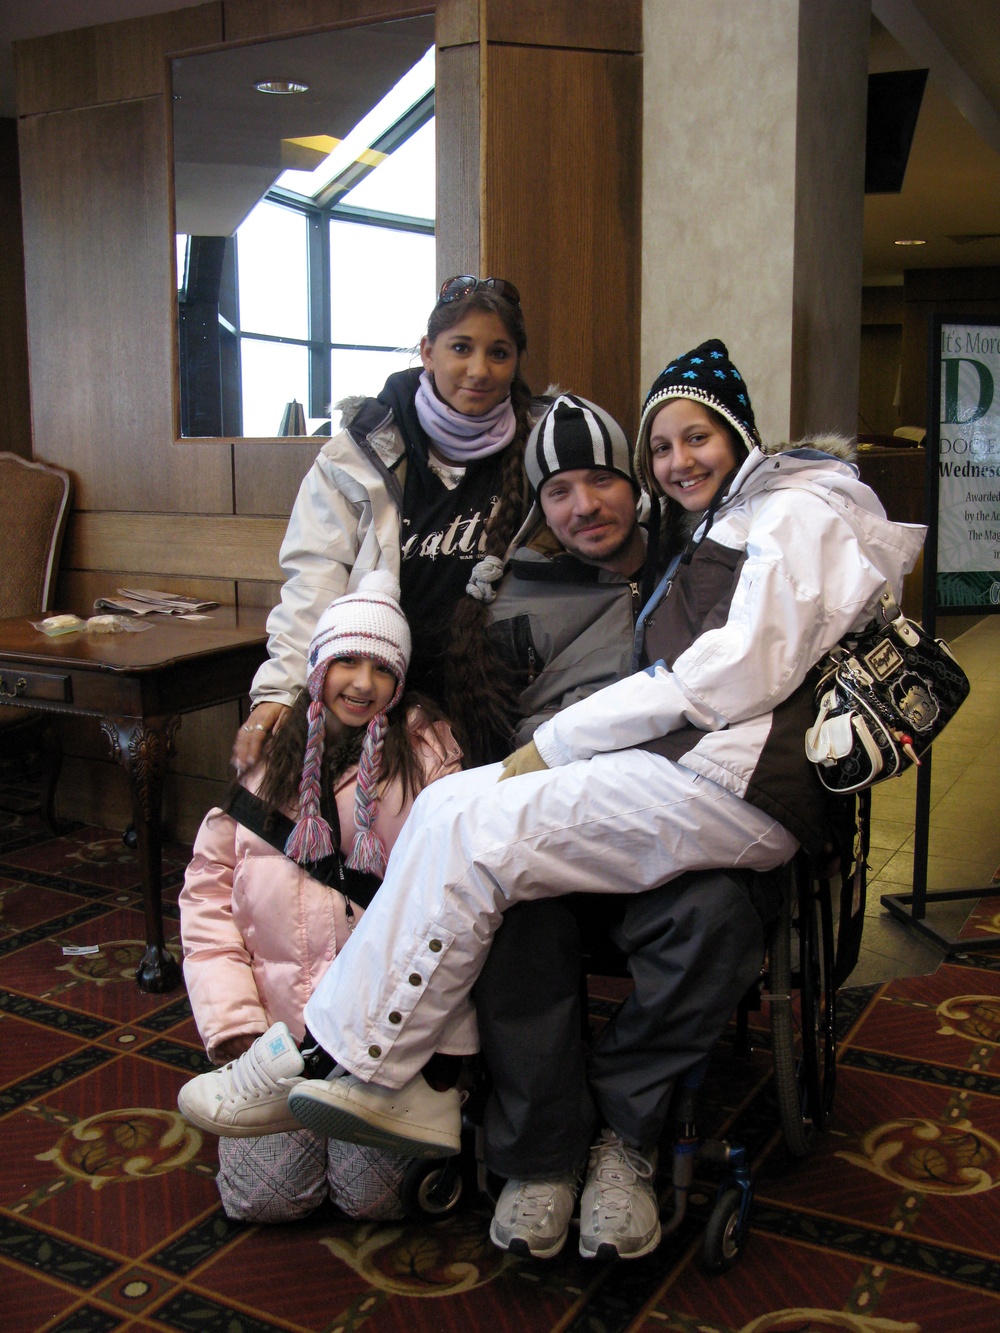 Disabled veterans hit the slopes at winter sports clinic